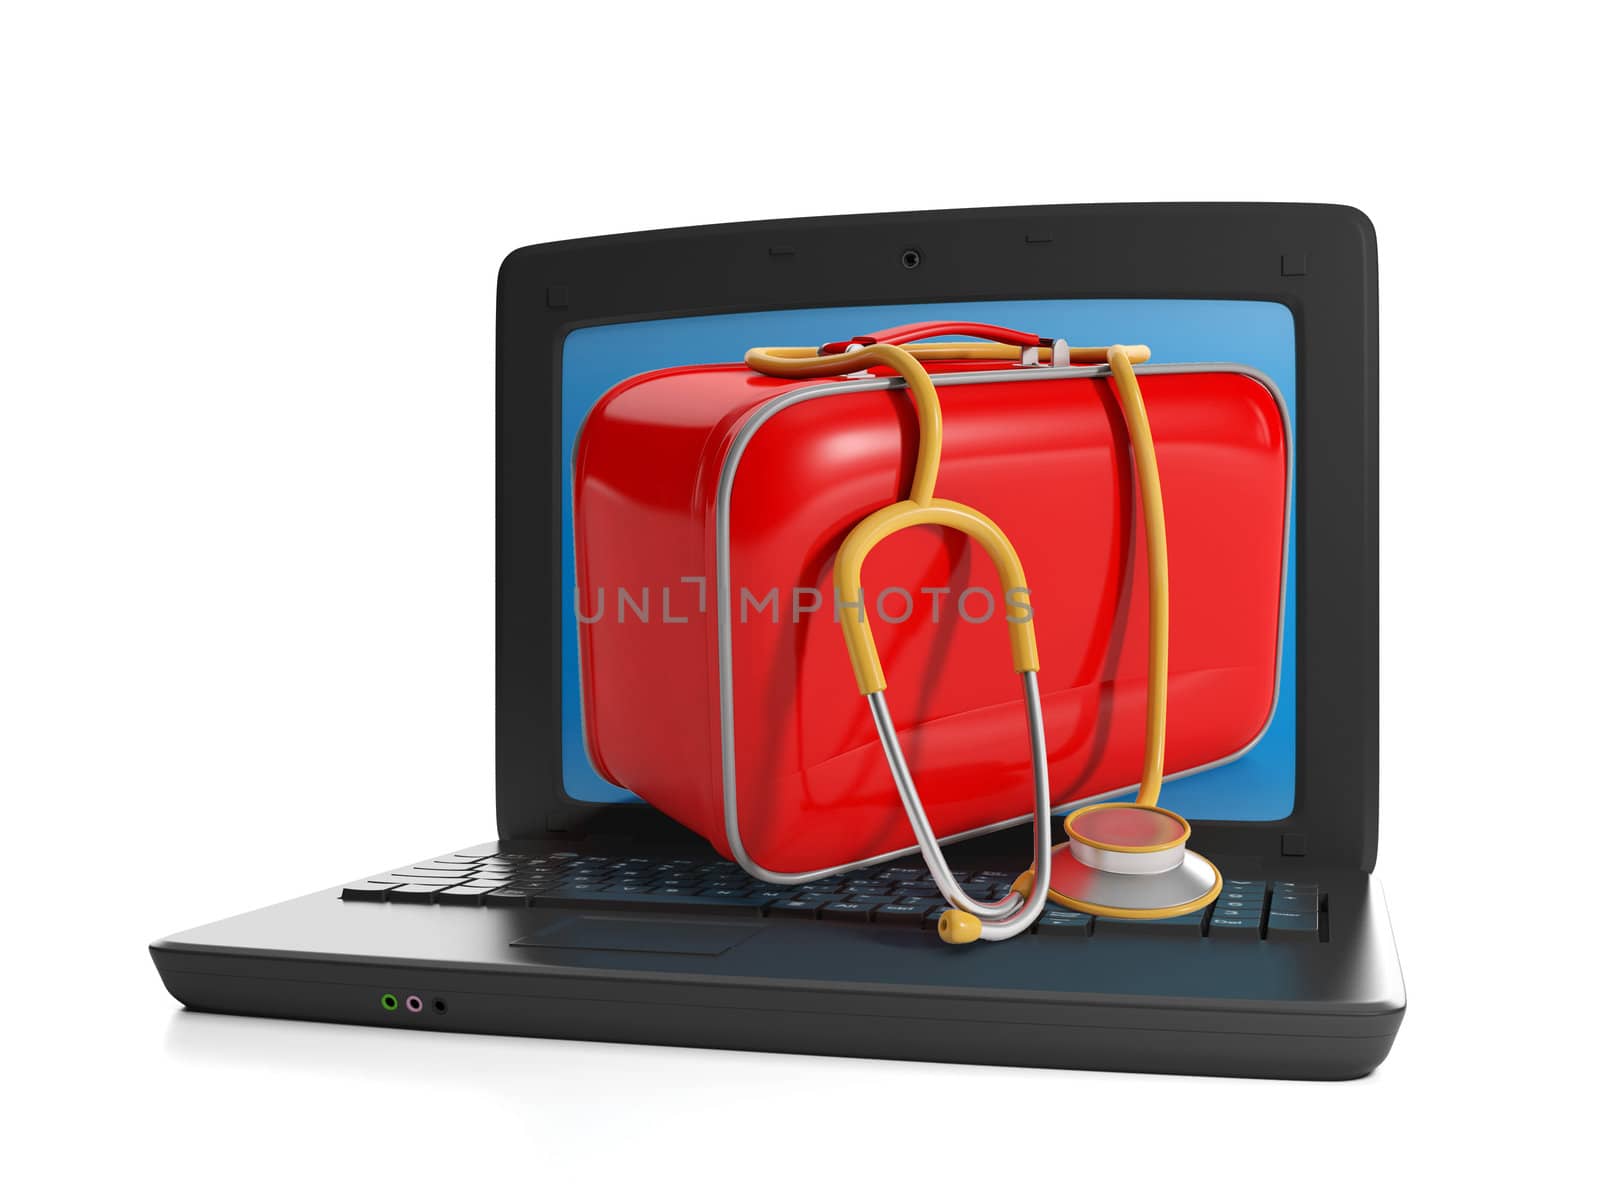 3d illustration of computer technologies. First-aid kit and a la by kolobsek